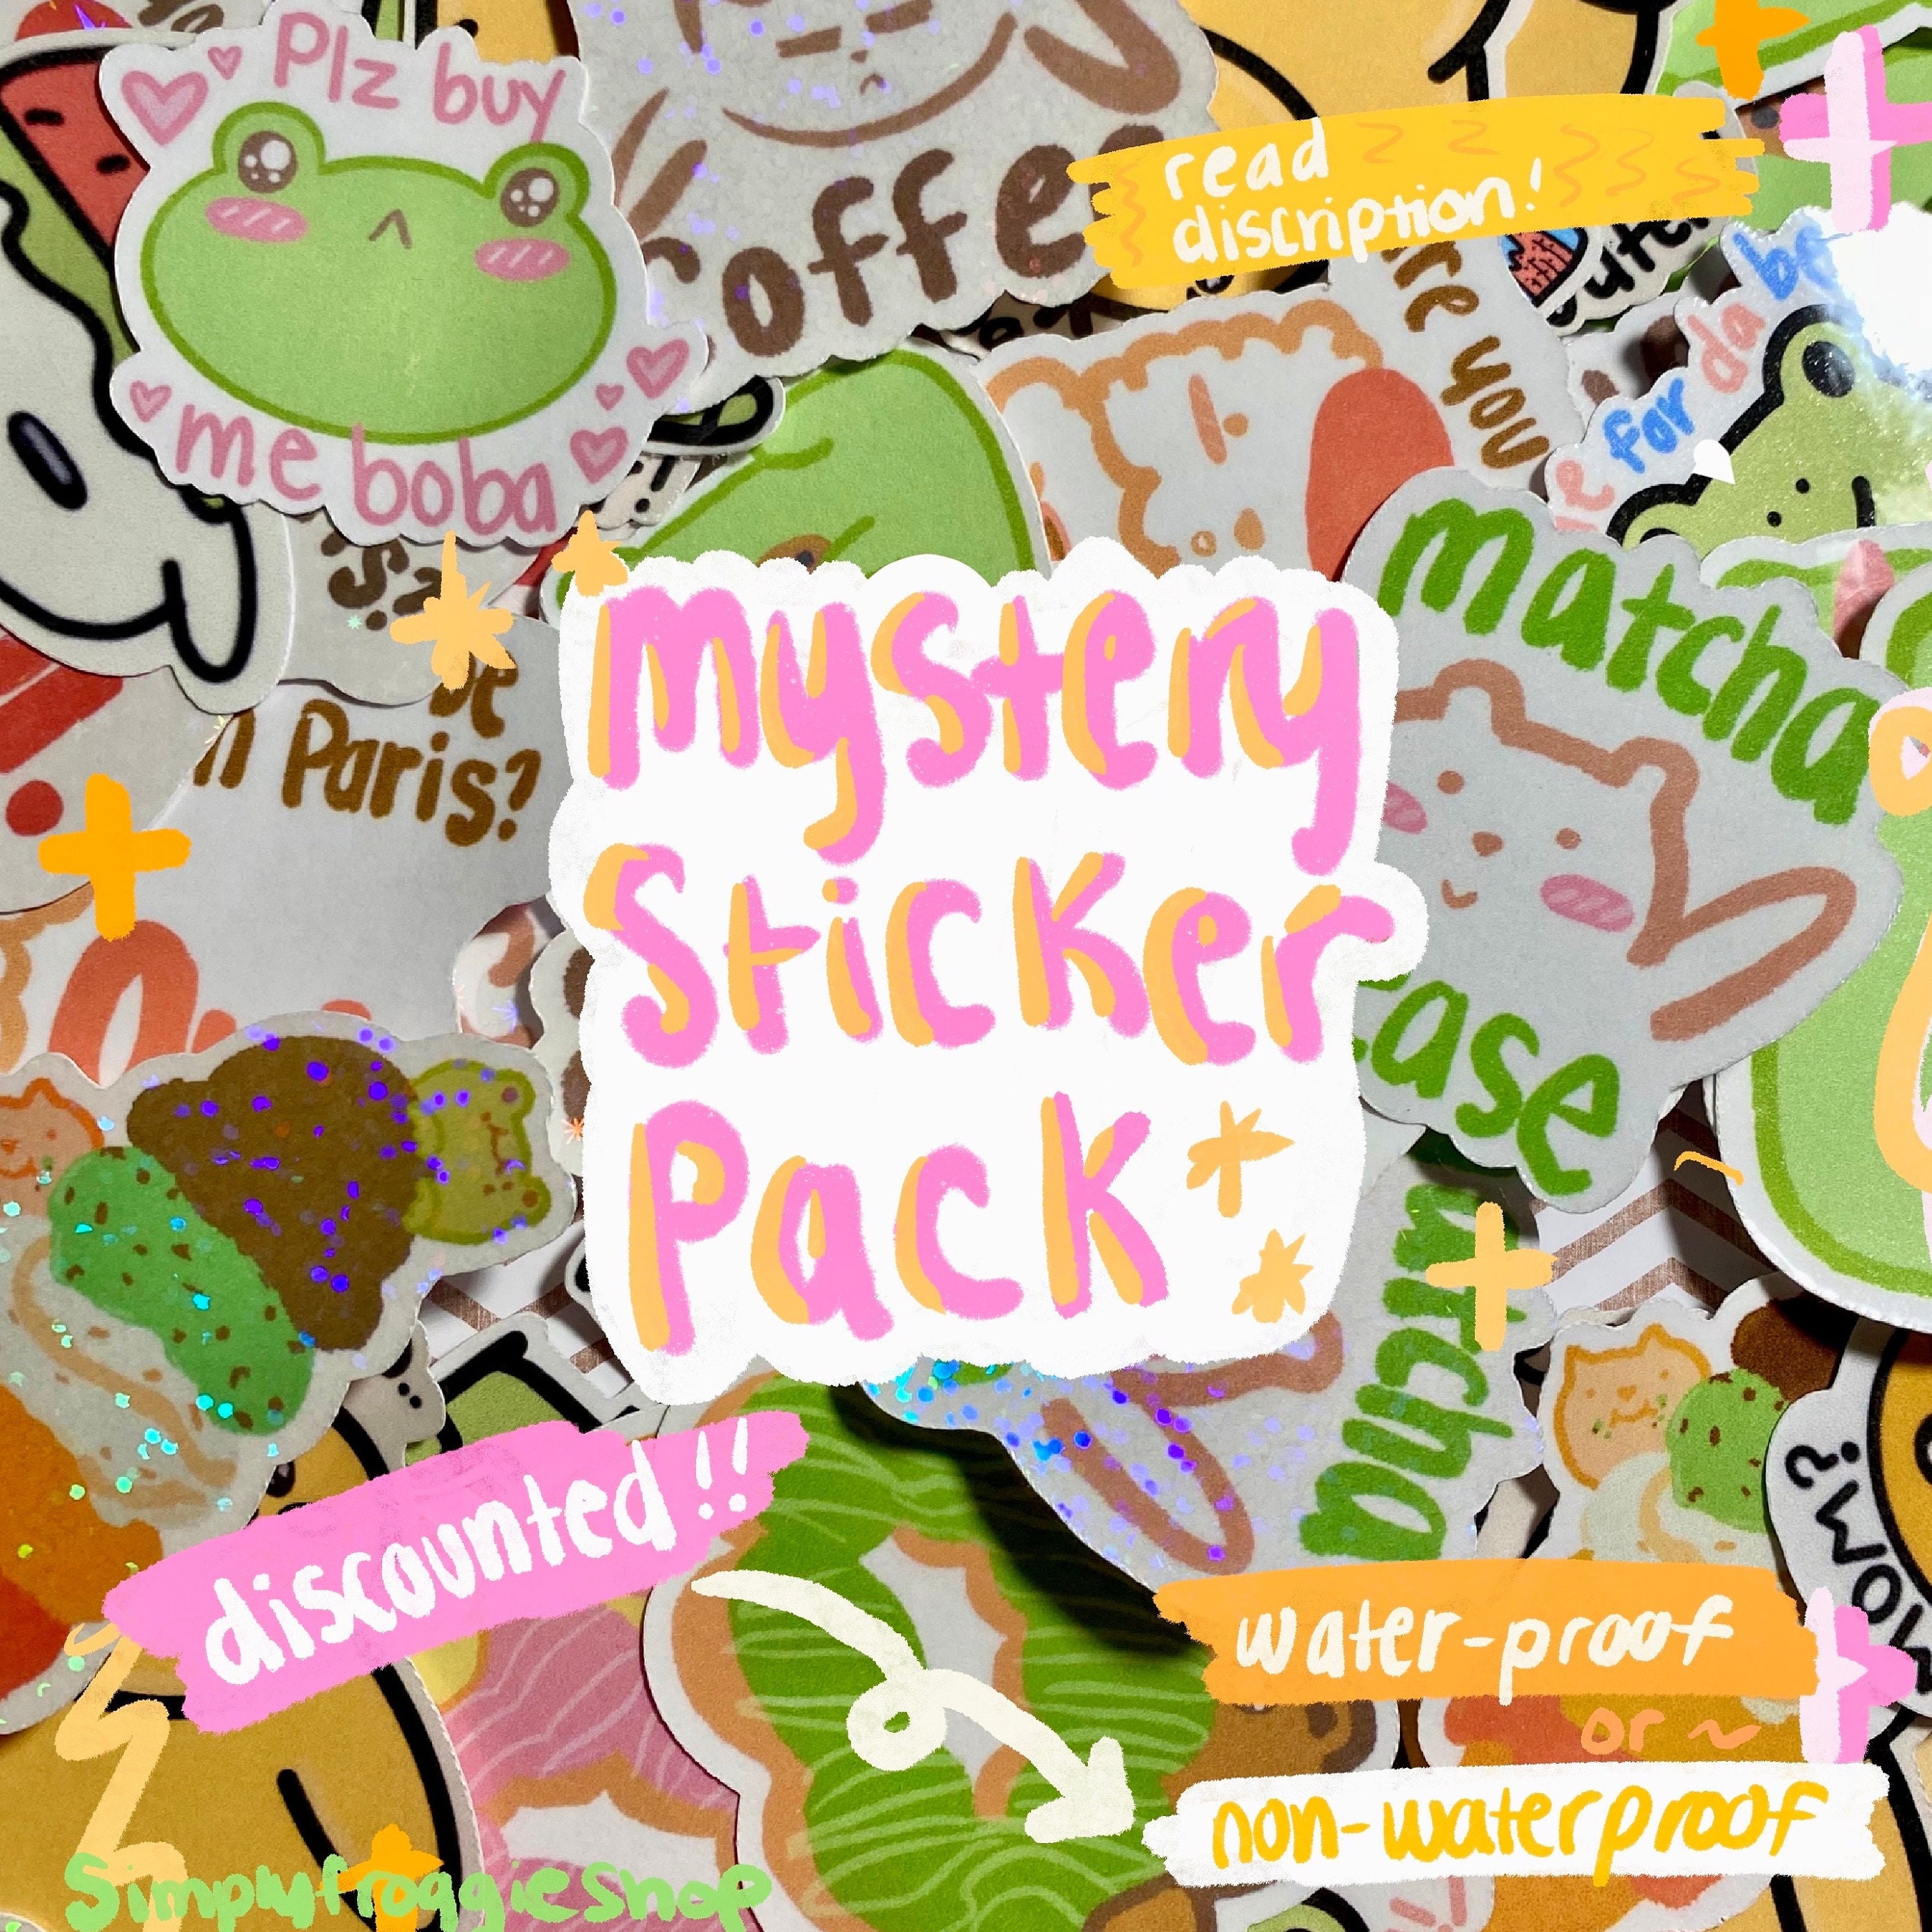 Postage Stamp Sticker Pack 10 Stickers Aesthetic Stickers Cute Stickers 